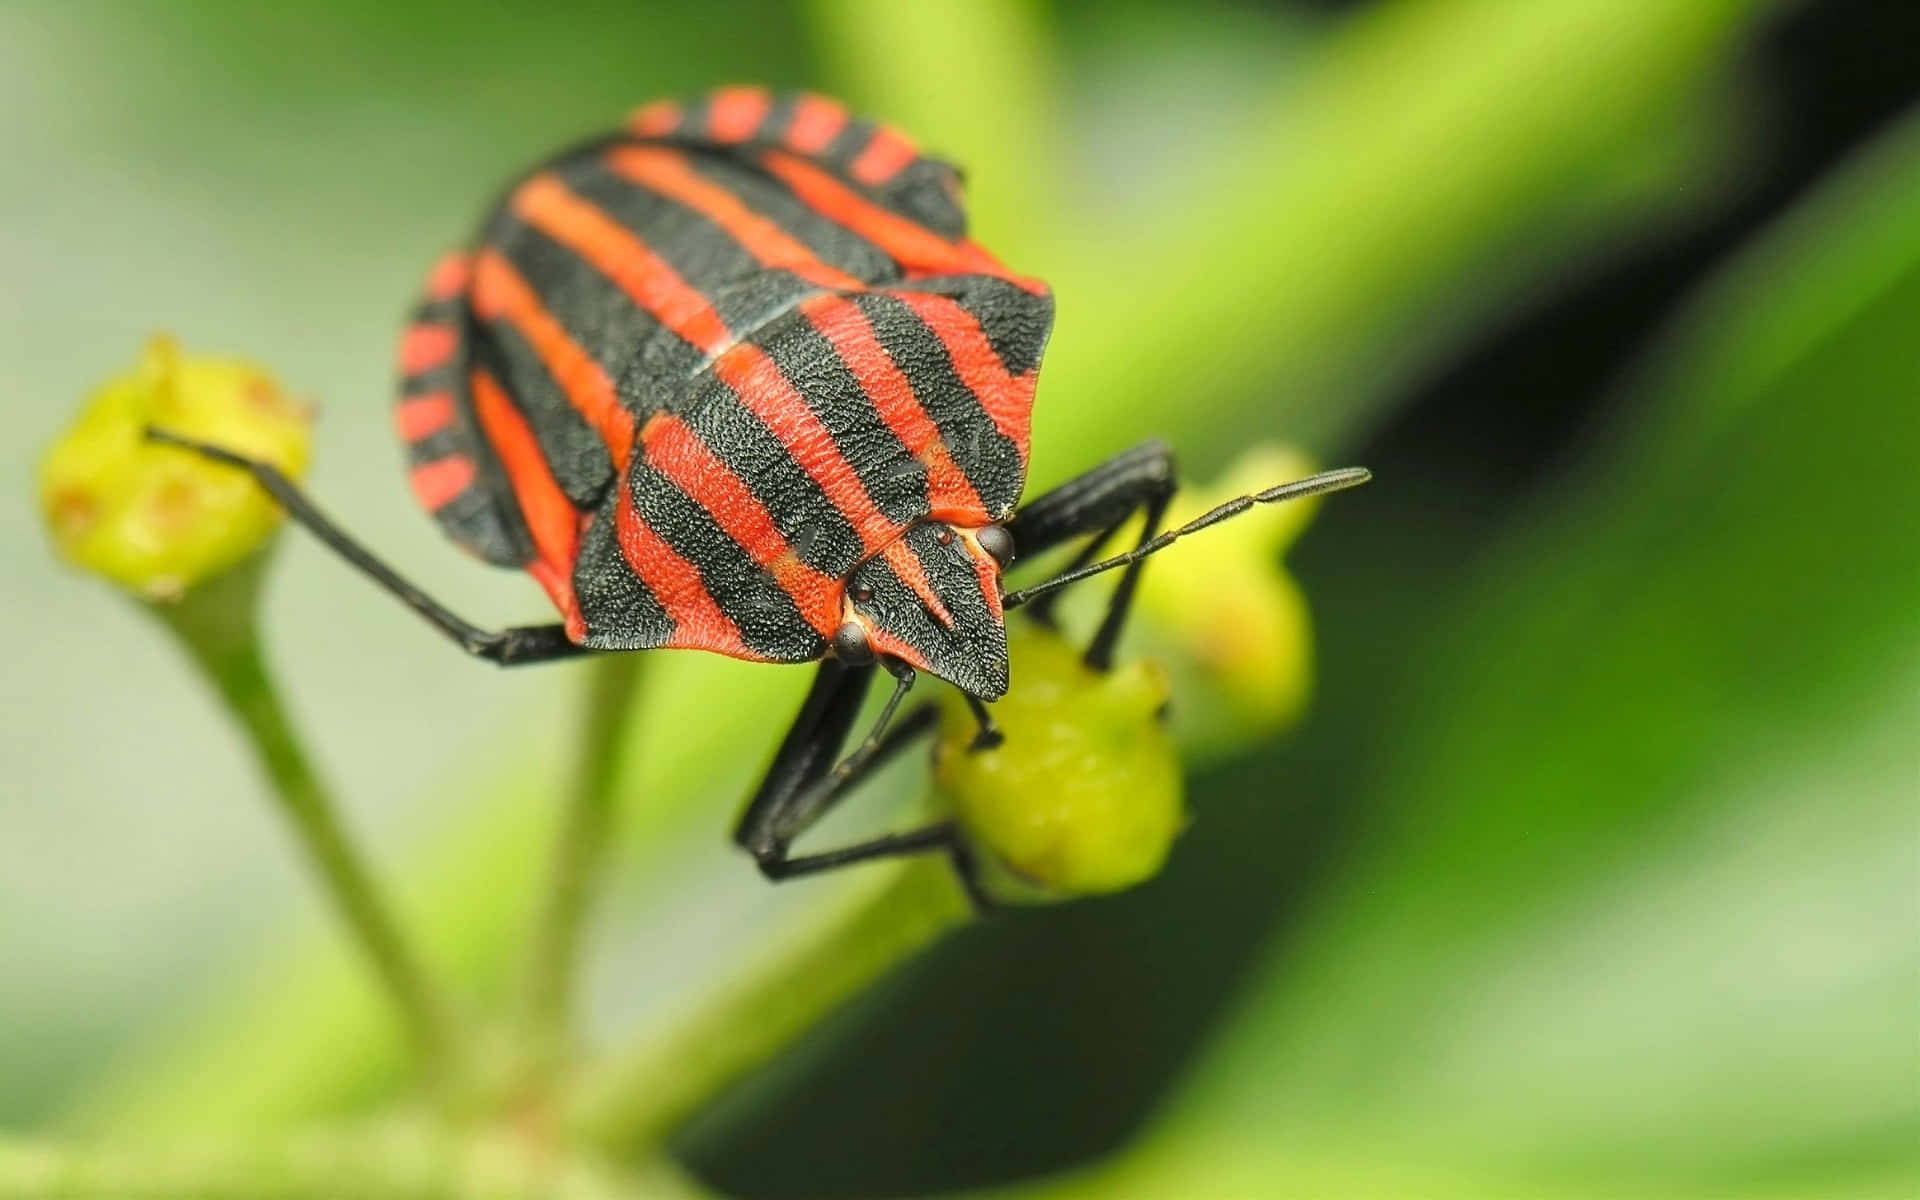 Tiger Stripe Insects Wallpaper